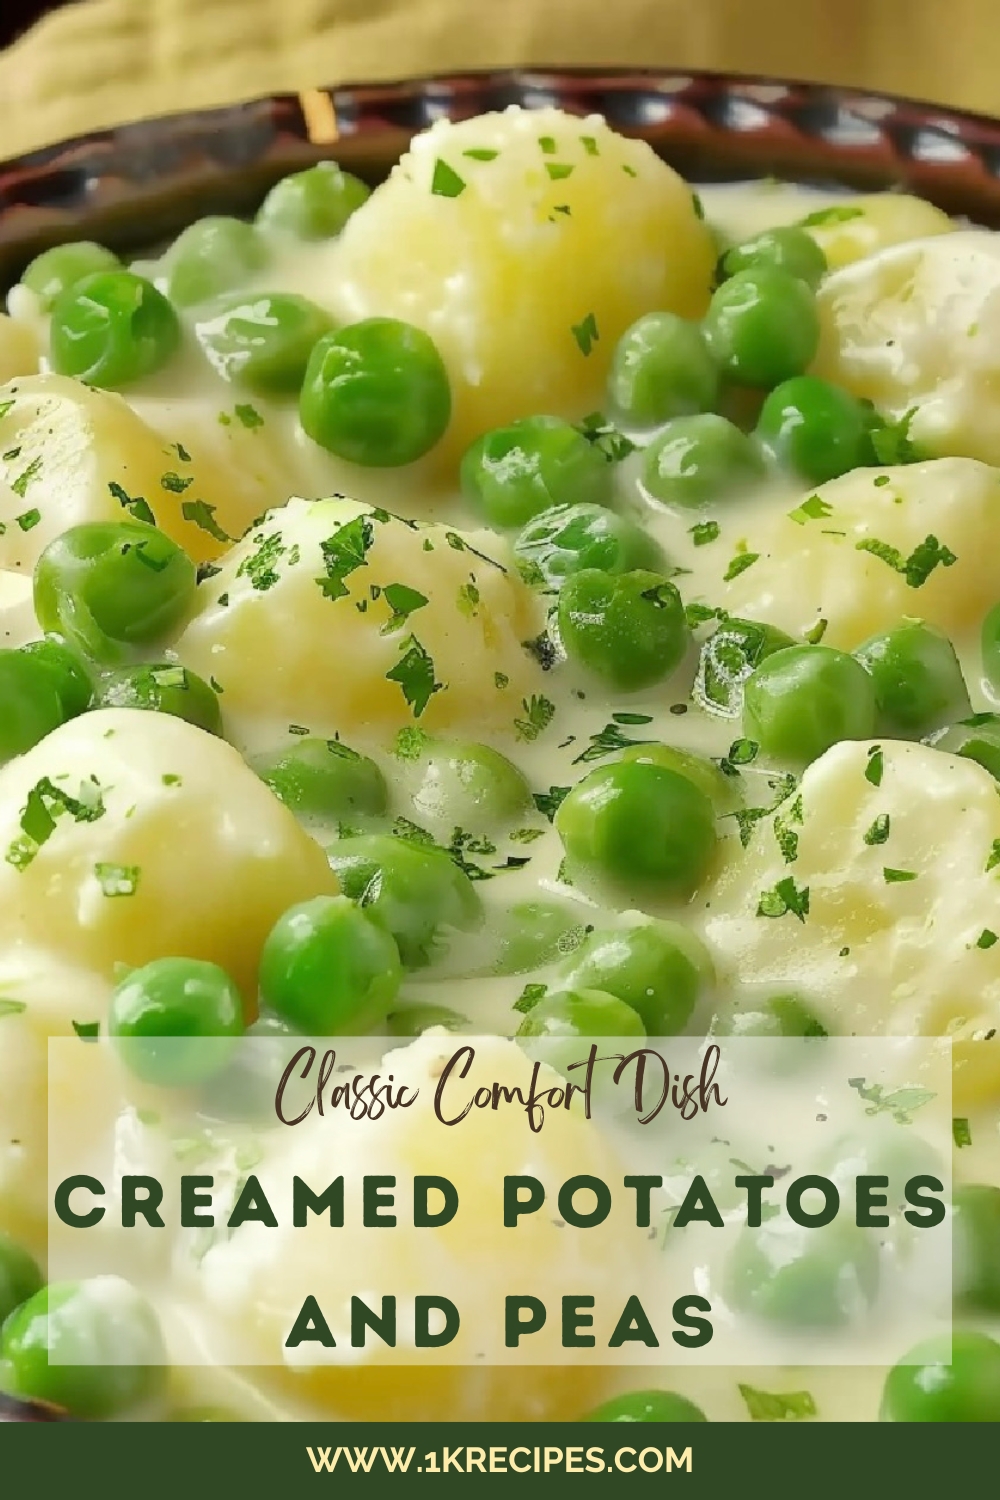 Rekindle your love for classic homestyle cooking with our Creamed Potatoes and Peas recipe. Perfect for family dinners and gatherings!